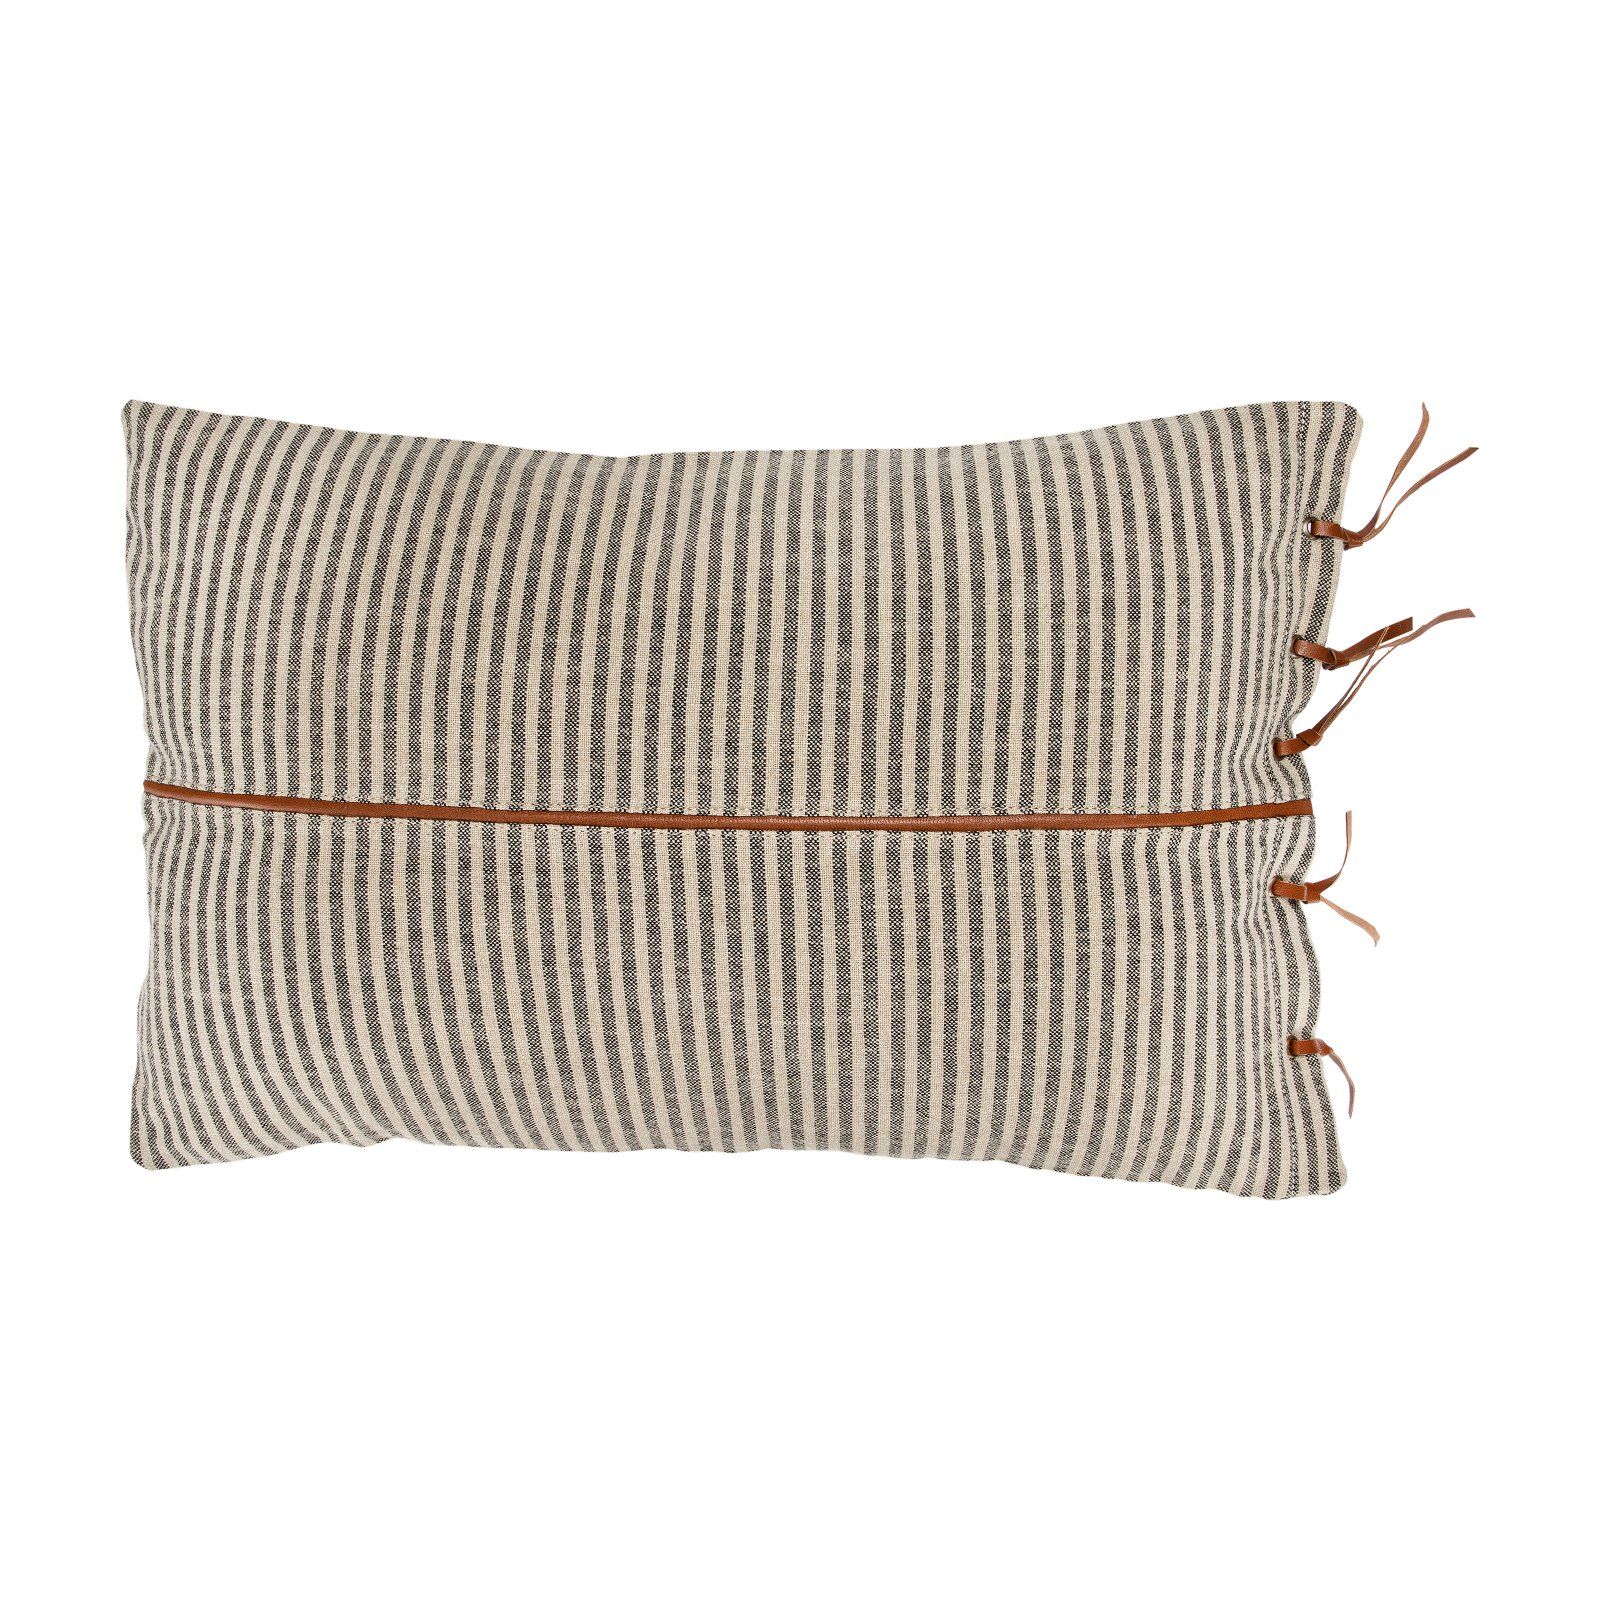 Woven Paths Striped Cotton Ticking Lumbar Pillow with Leather Trim, Beige/Black | Walmart (US)